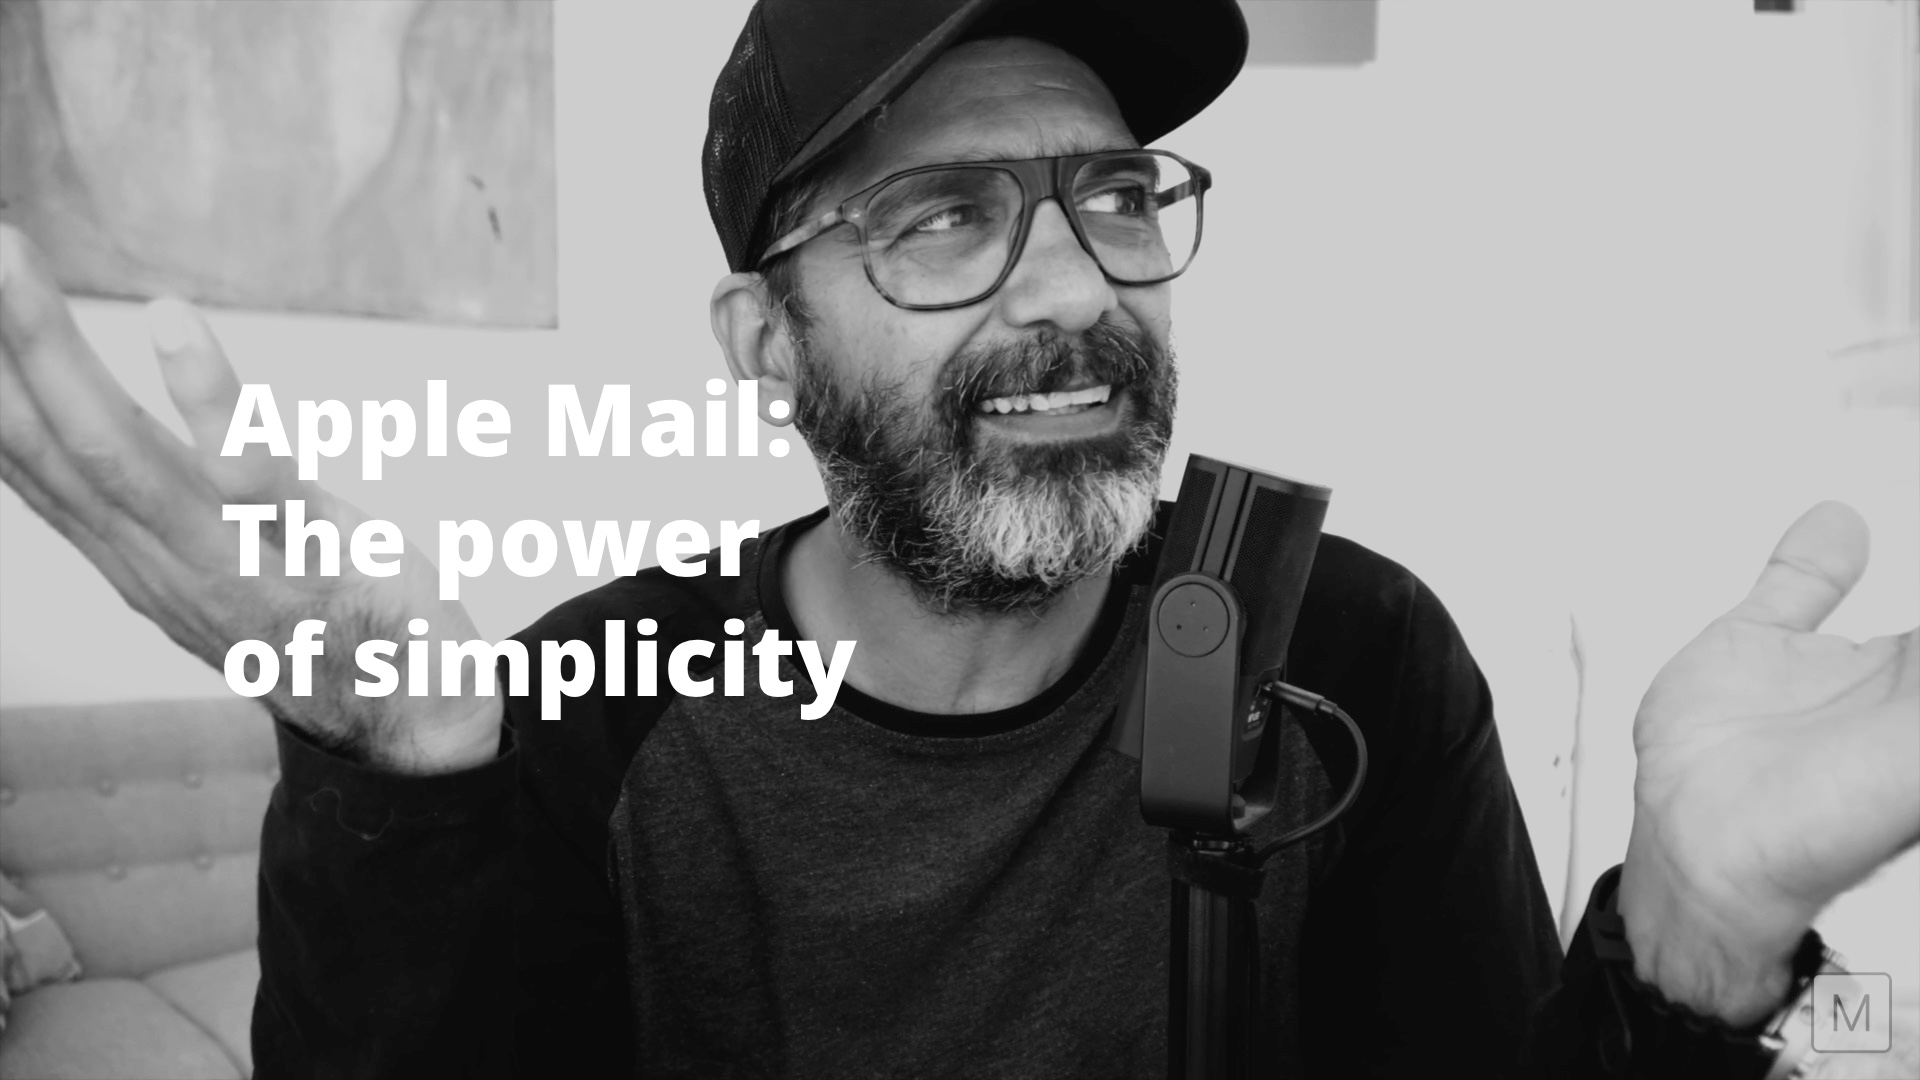 Apple Mail: The power of simplicity